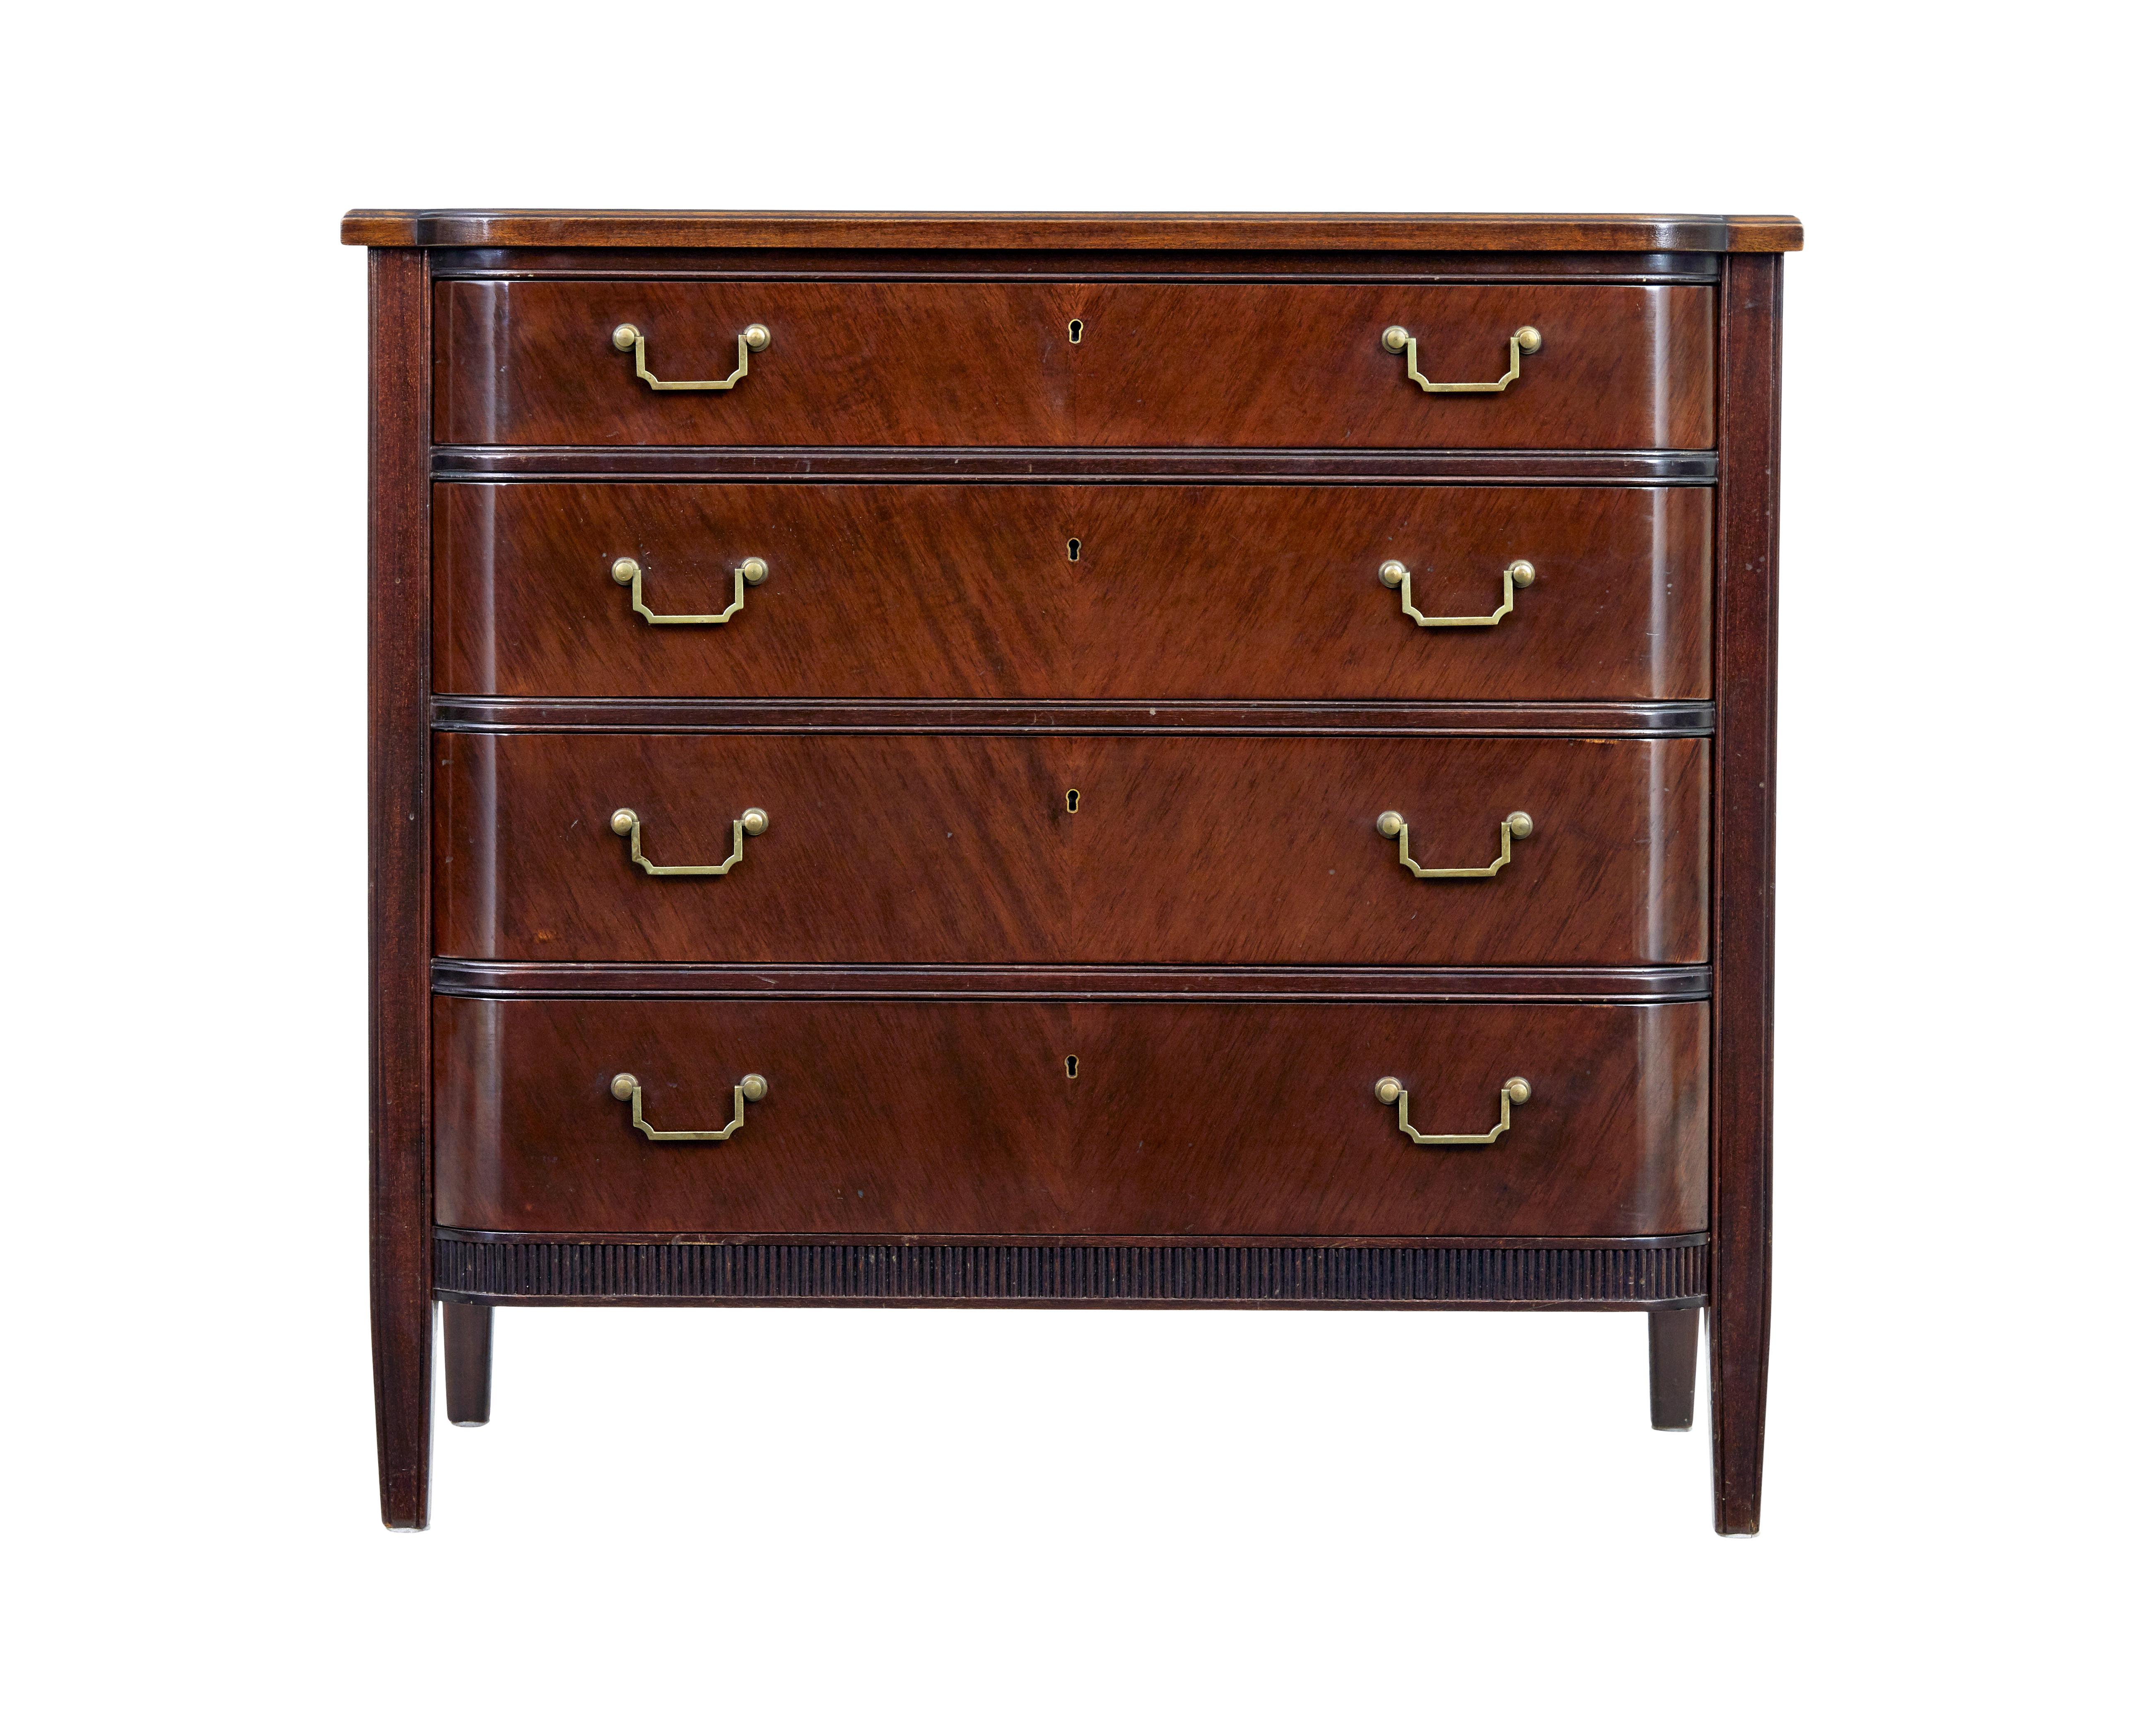 Fine quality Scandinavian mahogany chest of drawers circa 1950.

Good quality piece of furniture fitted with 4 graduating drawers.  All fitted with shaped brass handles.

Fluted detail along the bottom edge contrasting with the smoothness of the